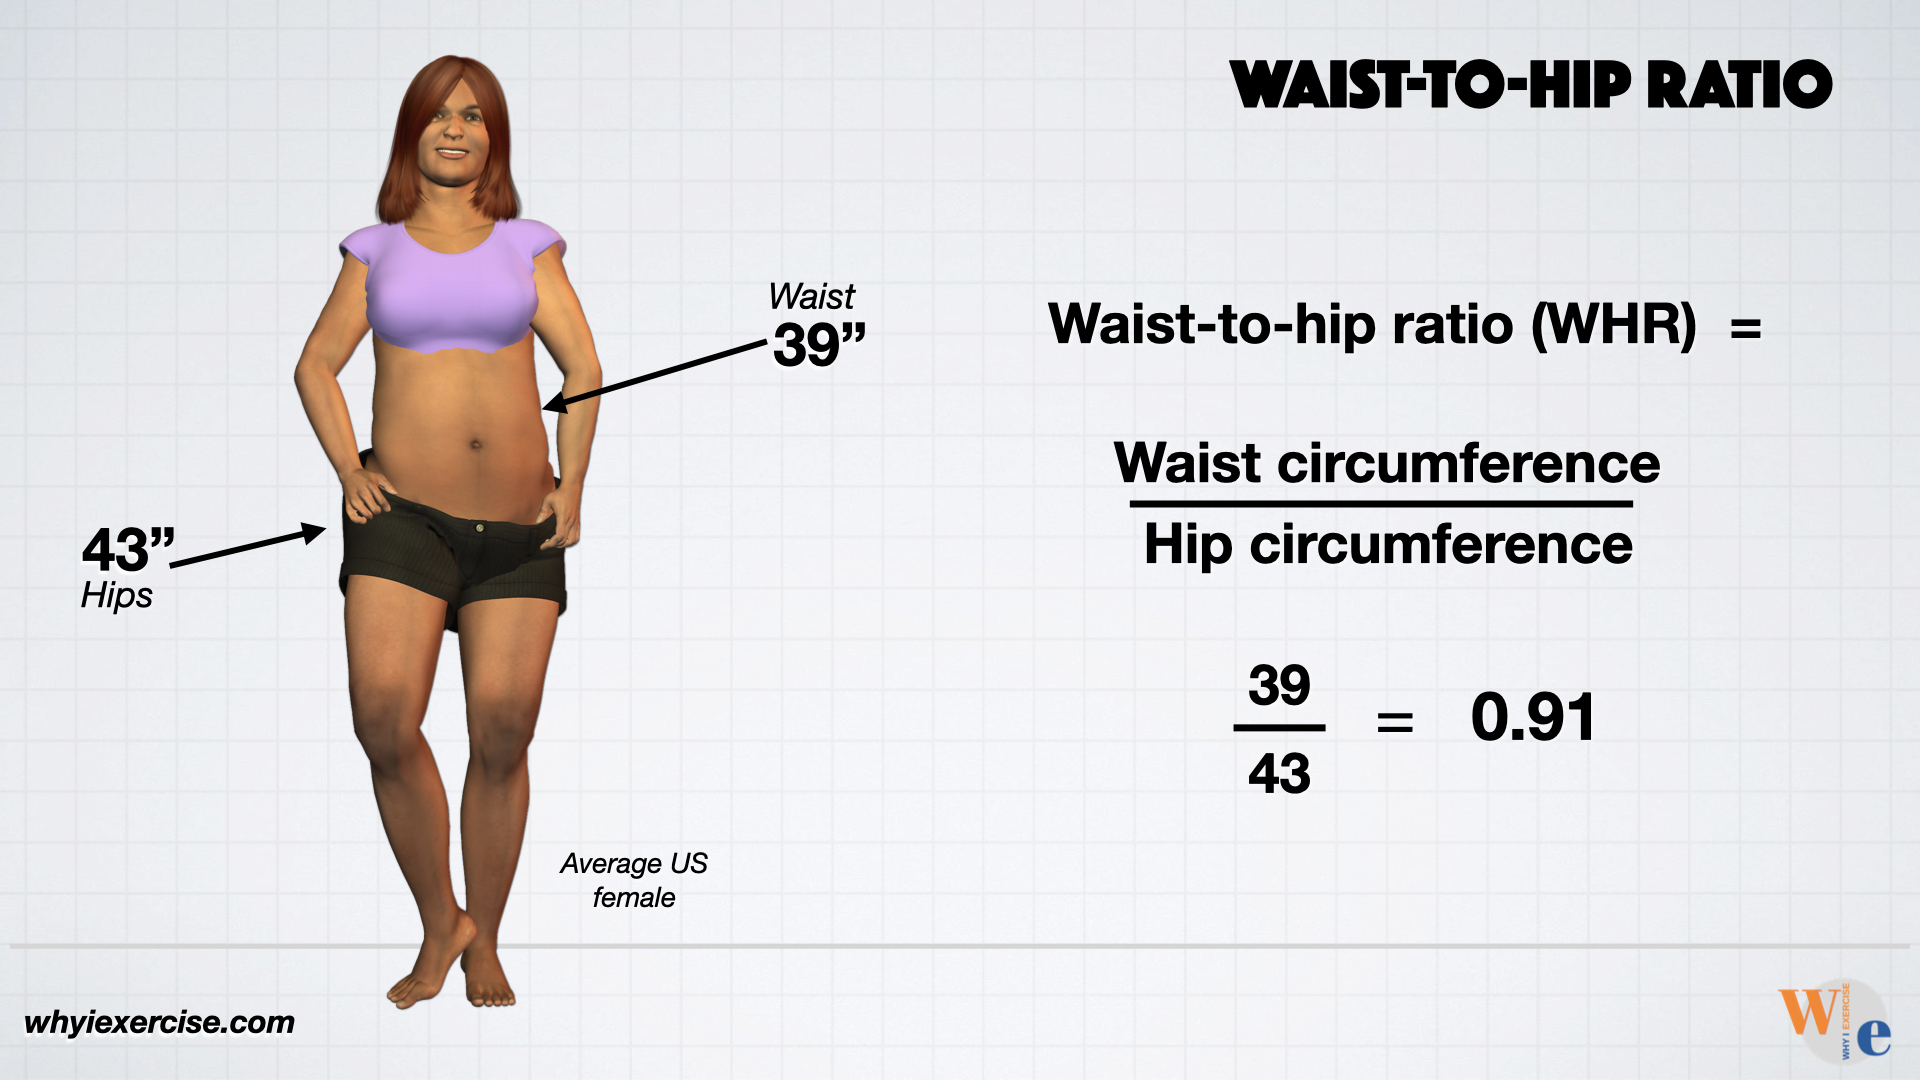 Is your waist-to-hip ratio above this? You're at a higher risk of